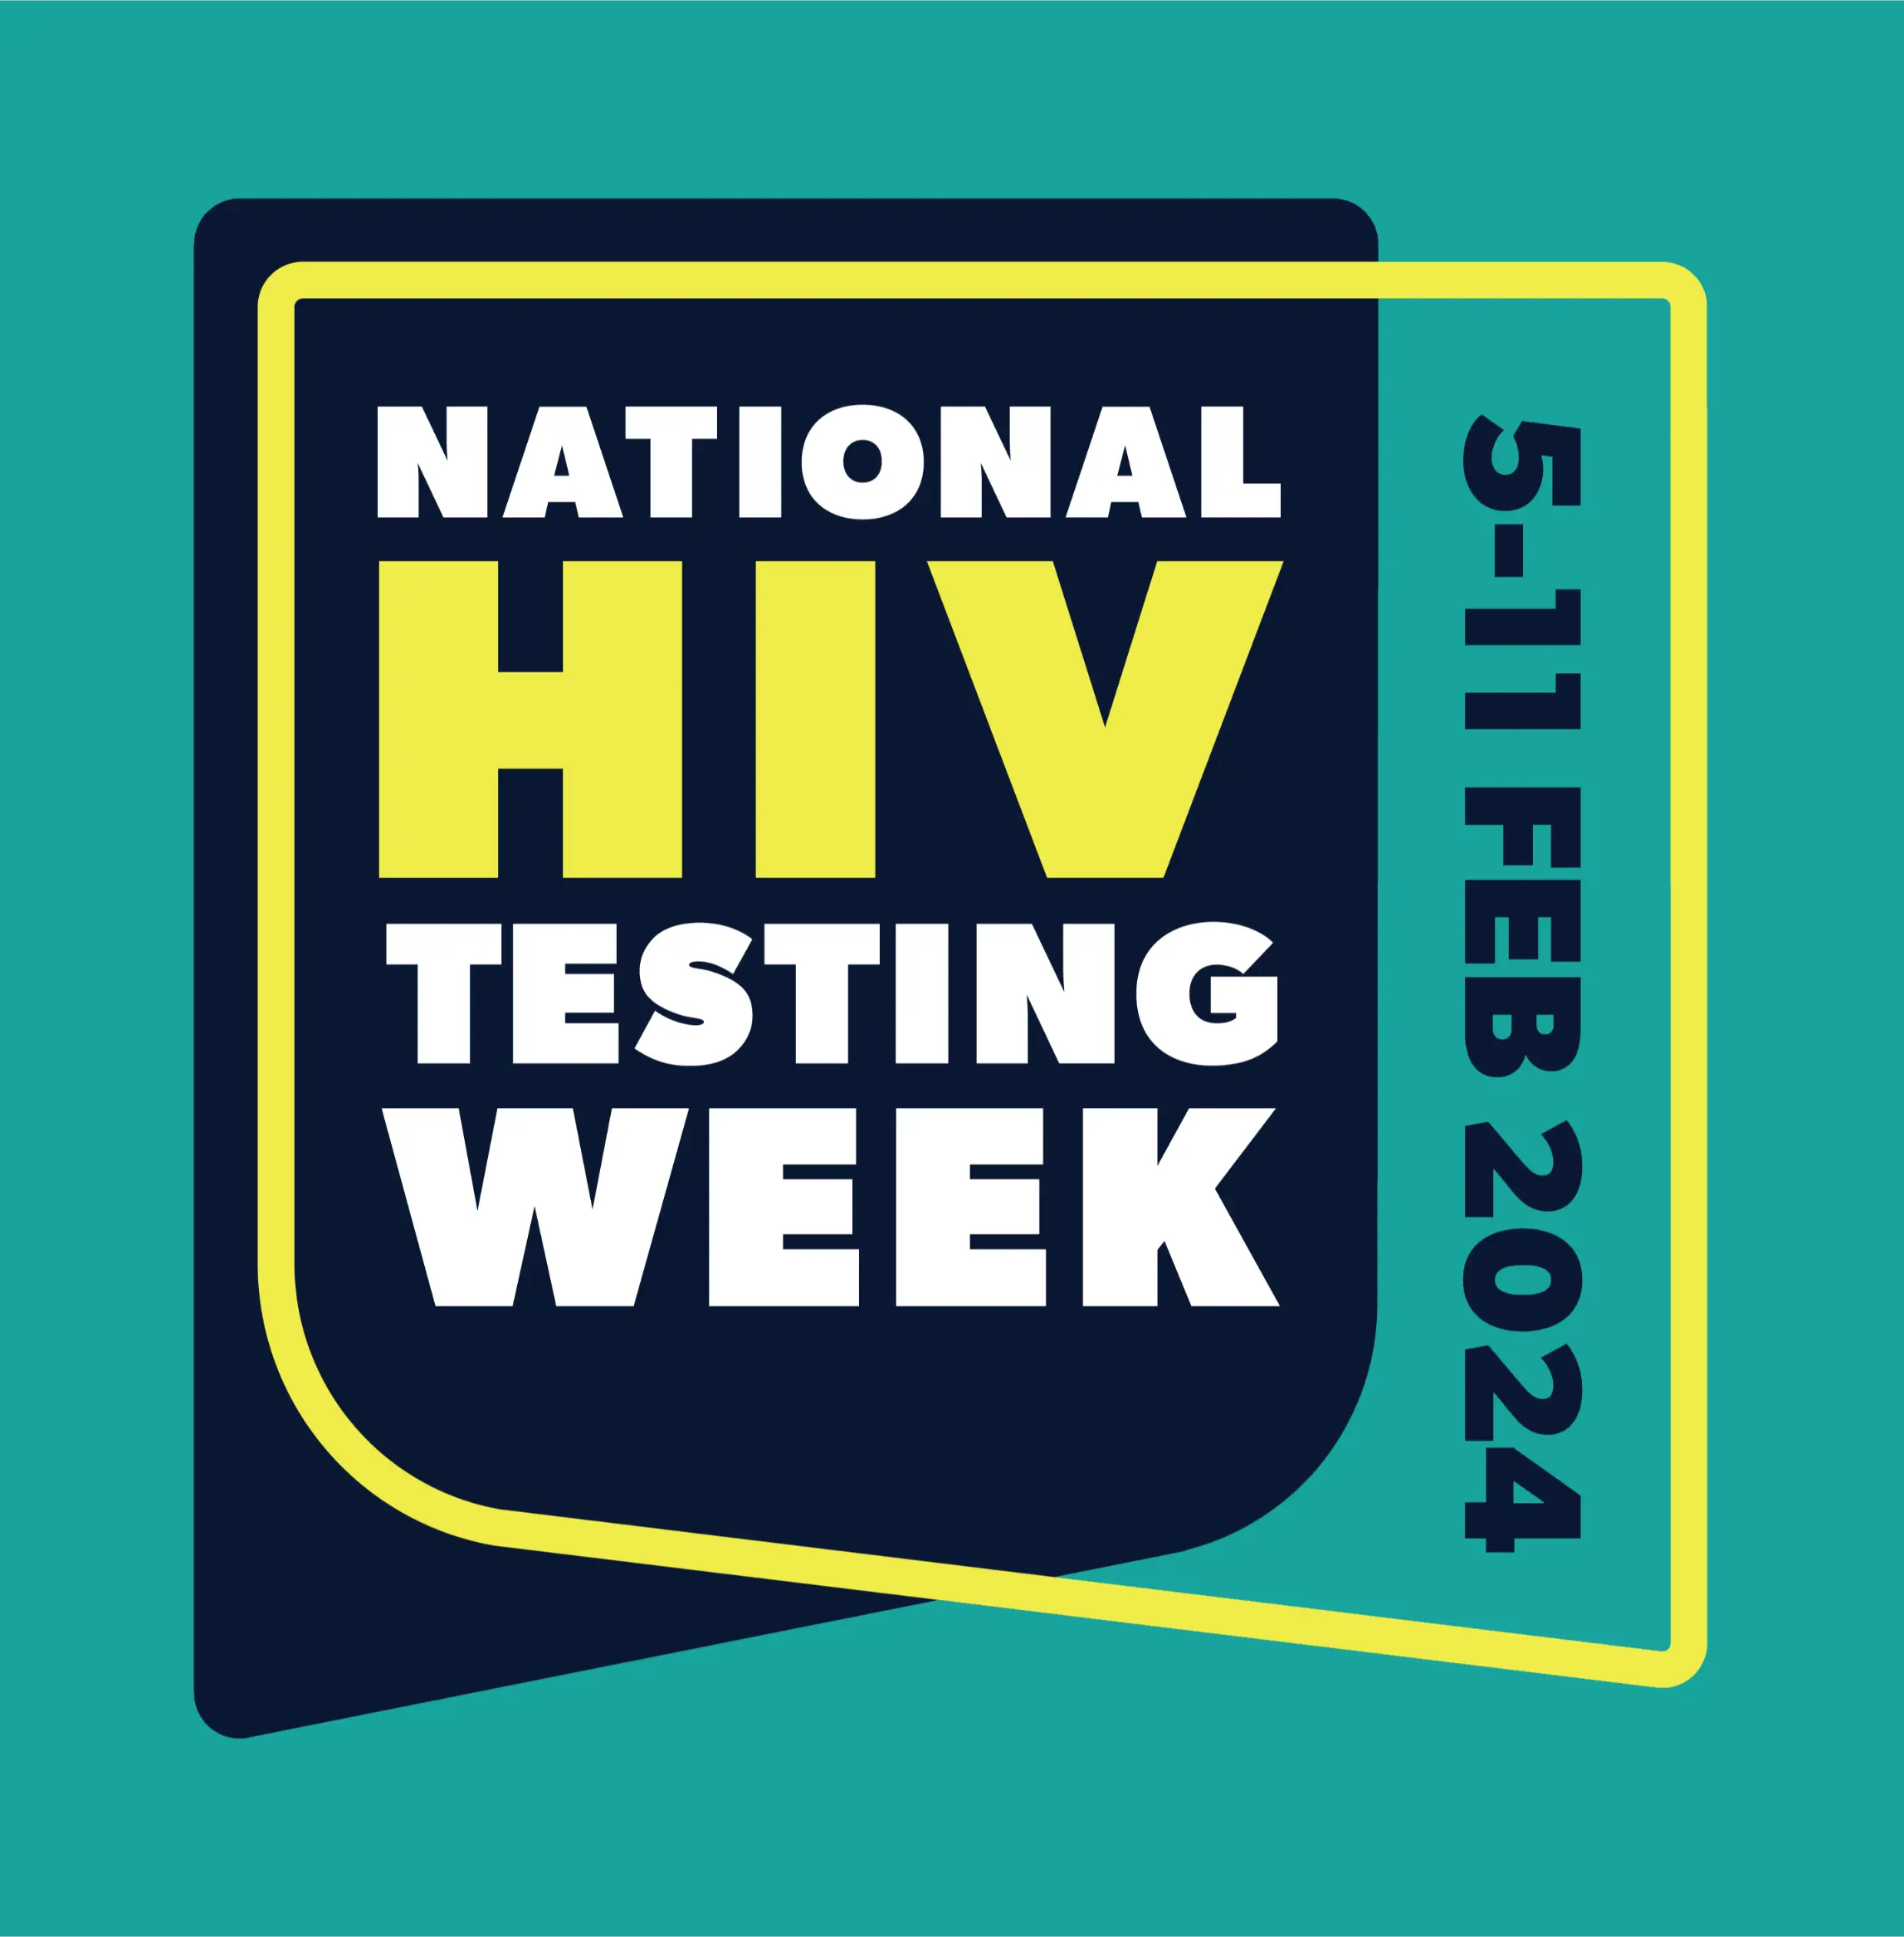 National HIV Testing Week launches in Essex with free HIV testing across the country